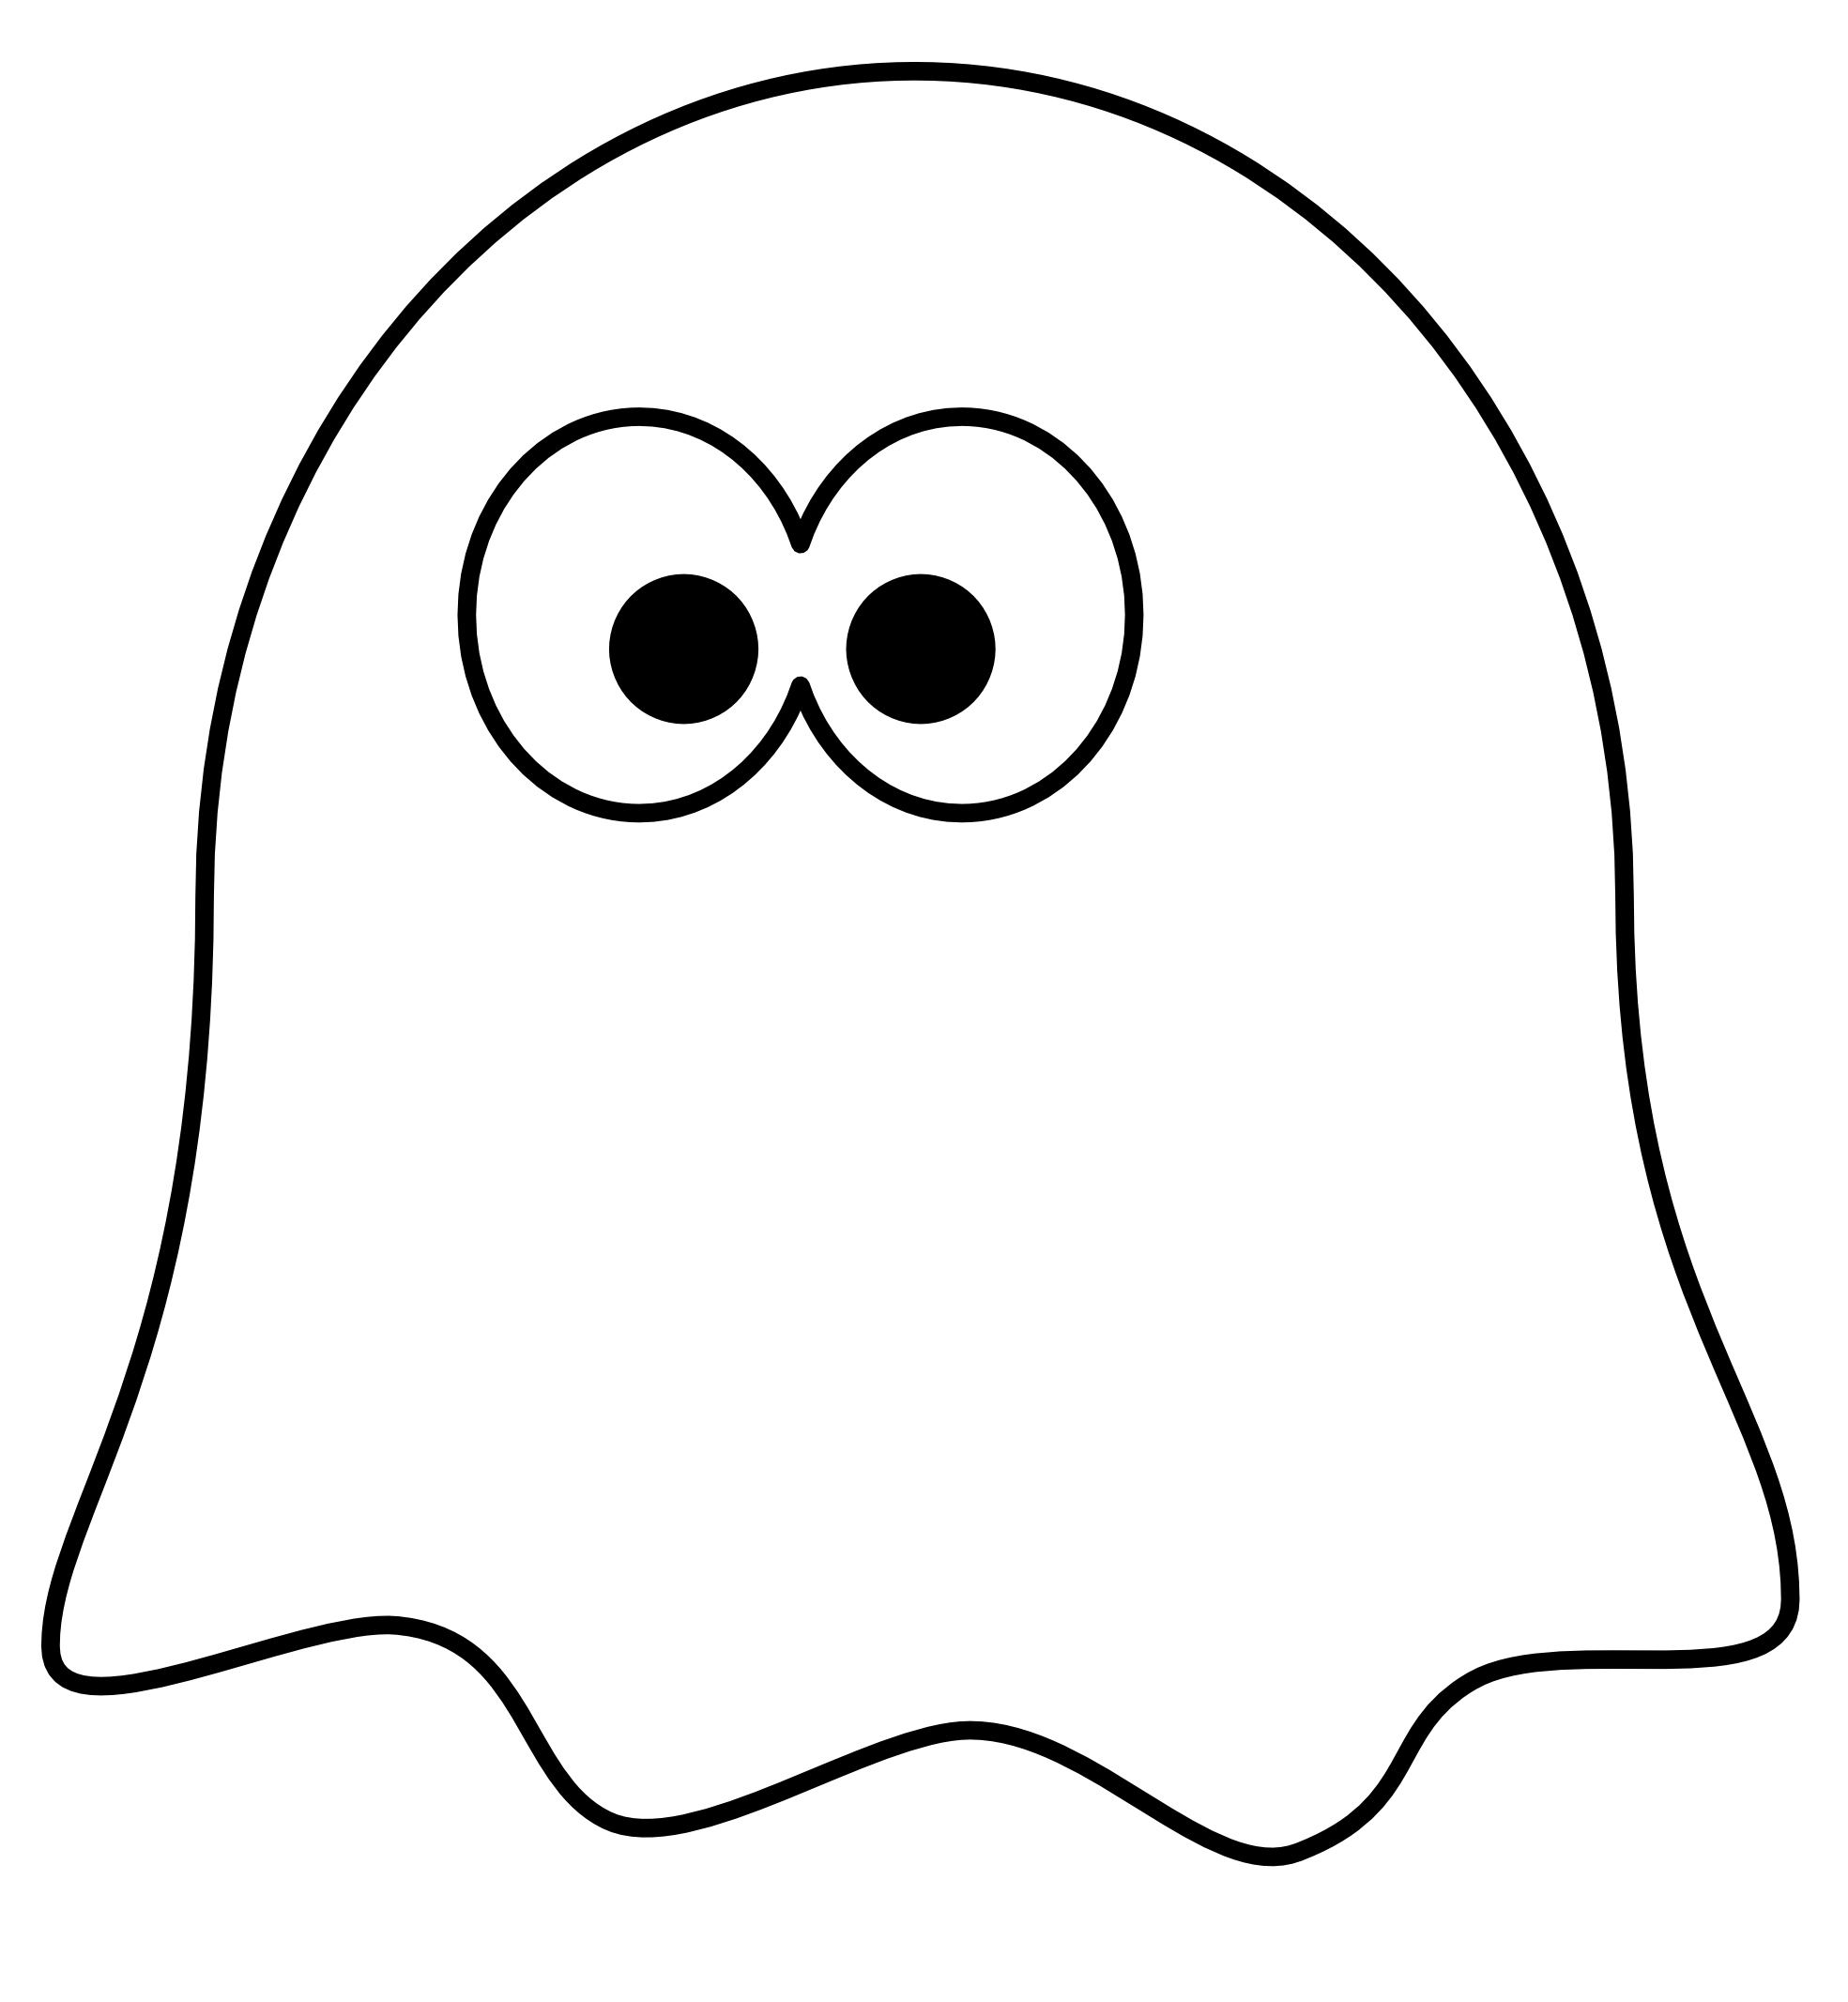 Animated ghosts clip art